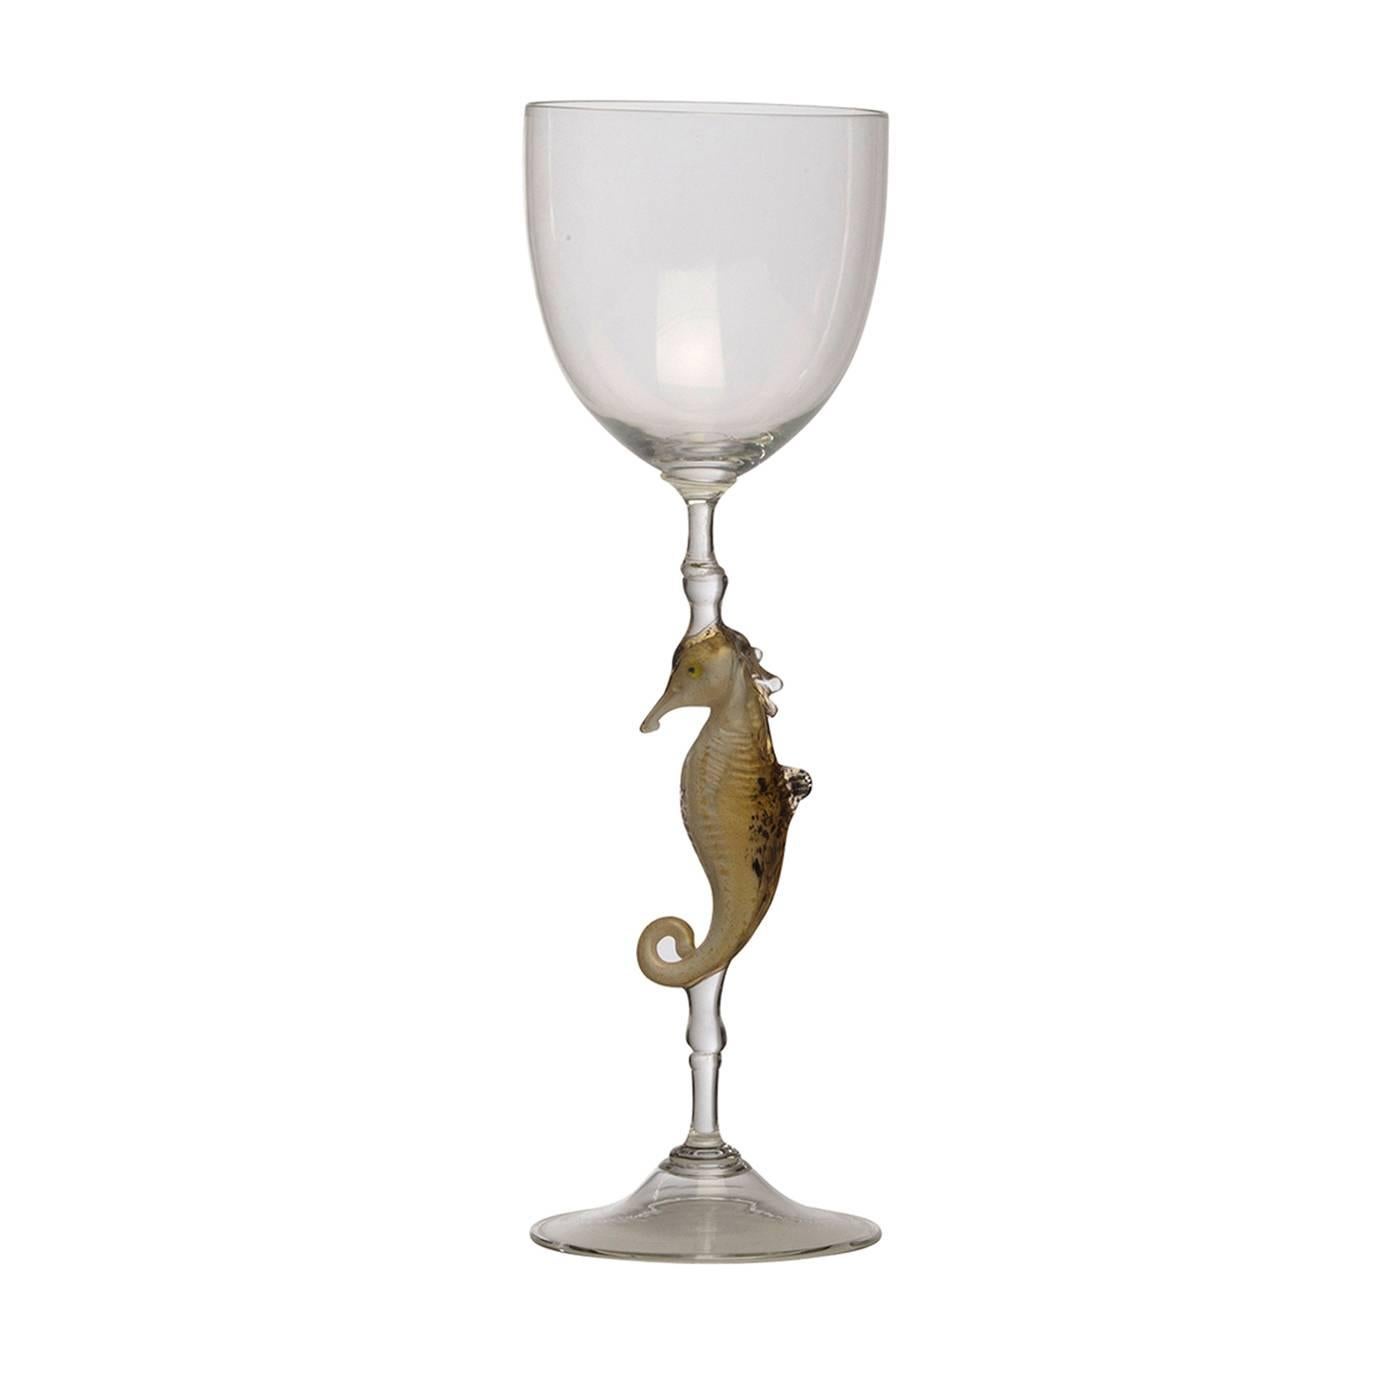 A set of graceful and precious wine glasses in clear Murano glass by famous Venetian glass master Dario Frare. Each glass is handcrafted using the traditional blowing technique, while the stems are adorned with a small sculpture of different and